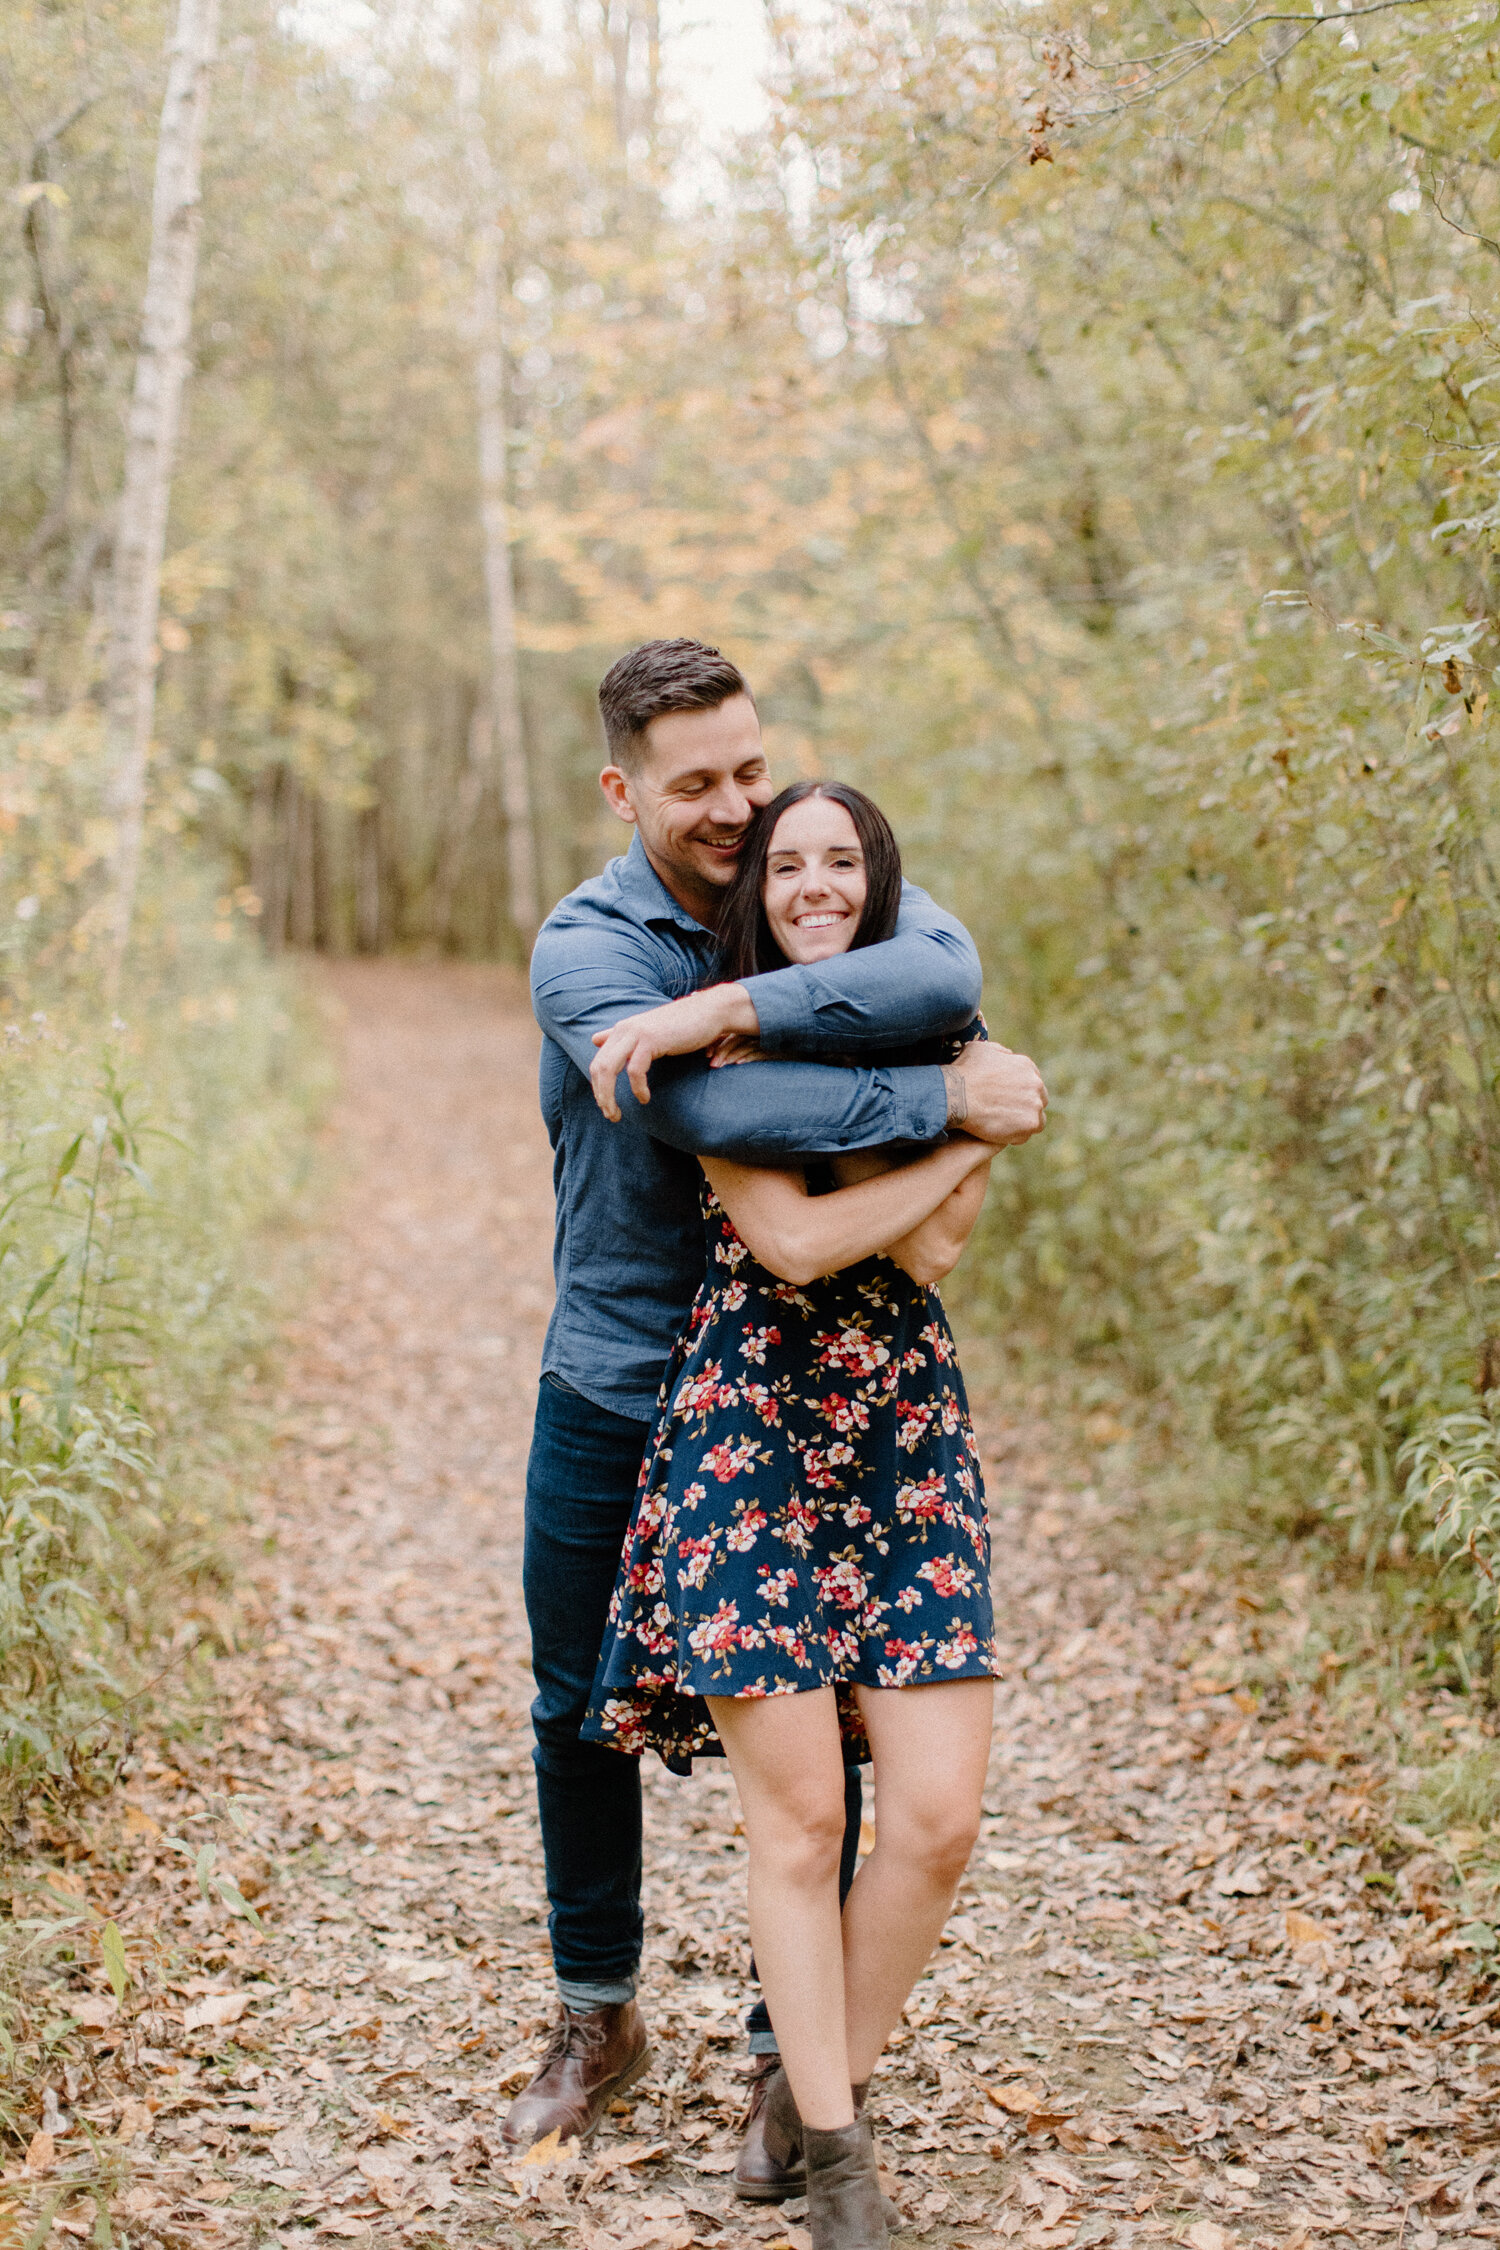  During this playful engagement photo session in Brockville, Ontario, Chelsea Mason Photography captures this couple laughing and wrapping their arms around one another on a hiking path. womens floral high low dress all denim mens outfit playful enga